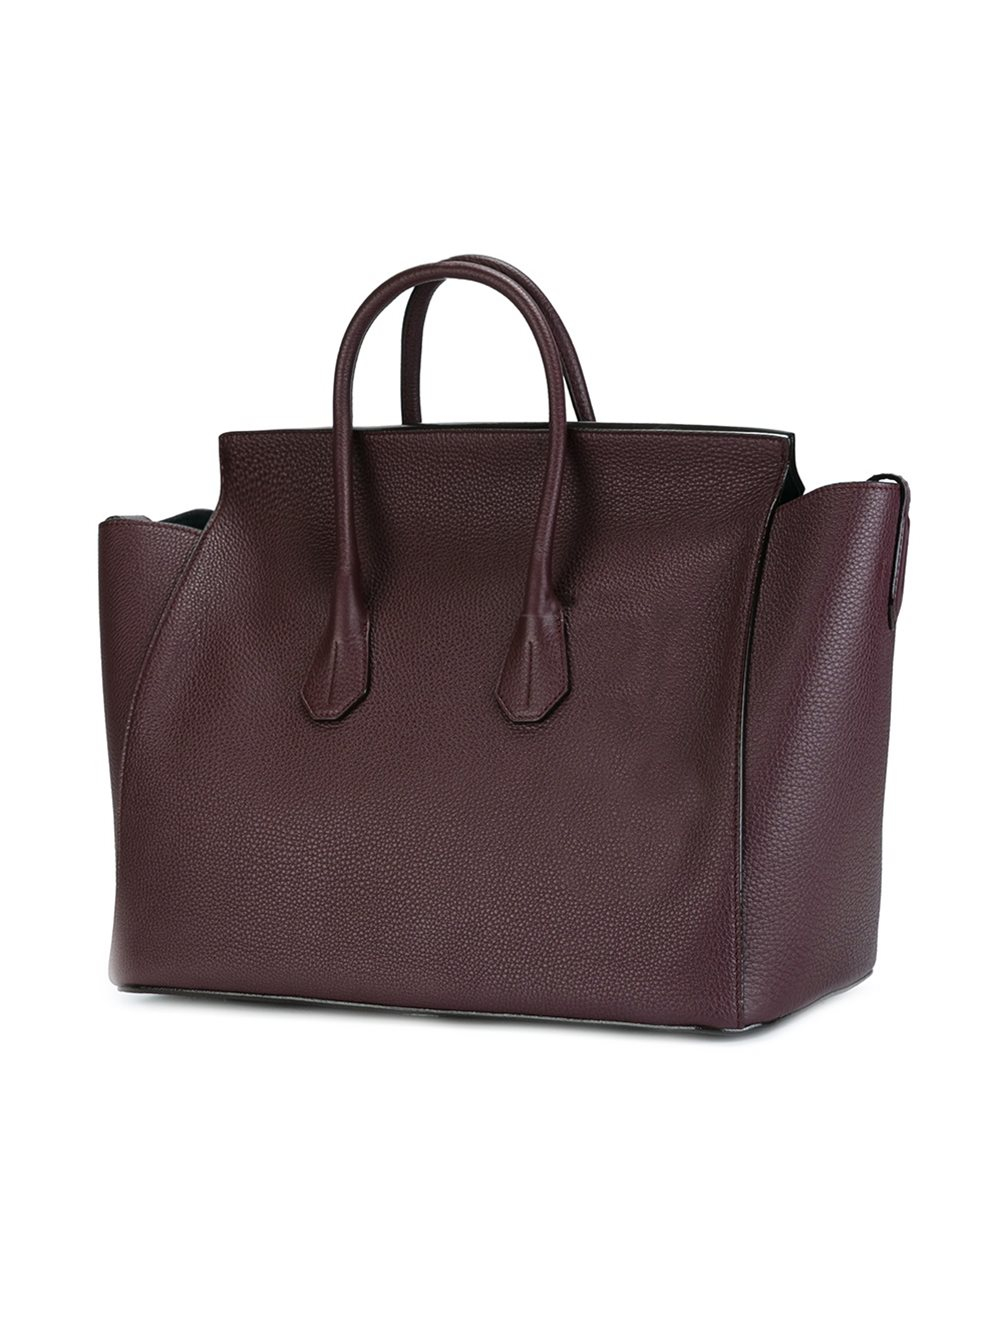 Lyst - Bally Fold Over Tote Bag in Red